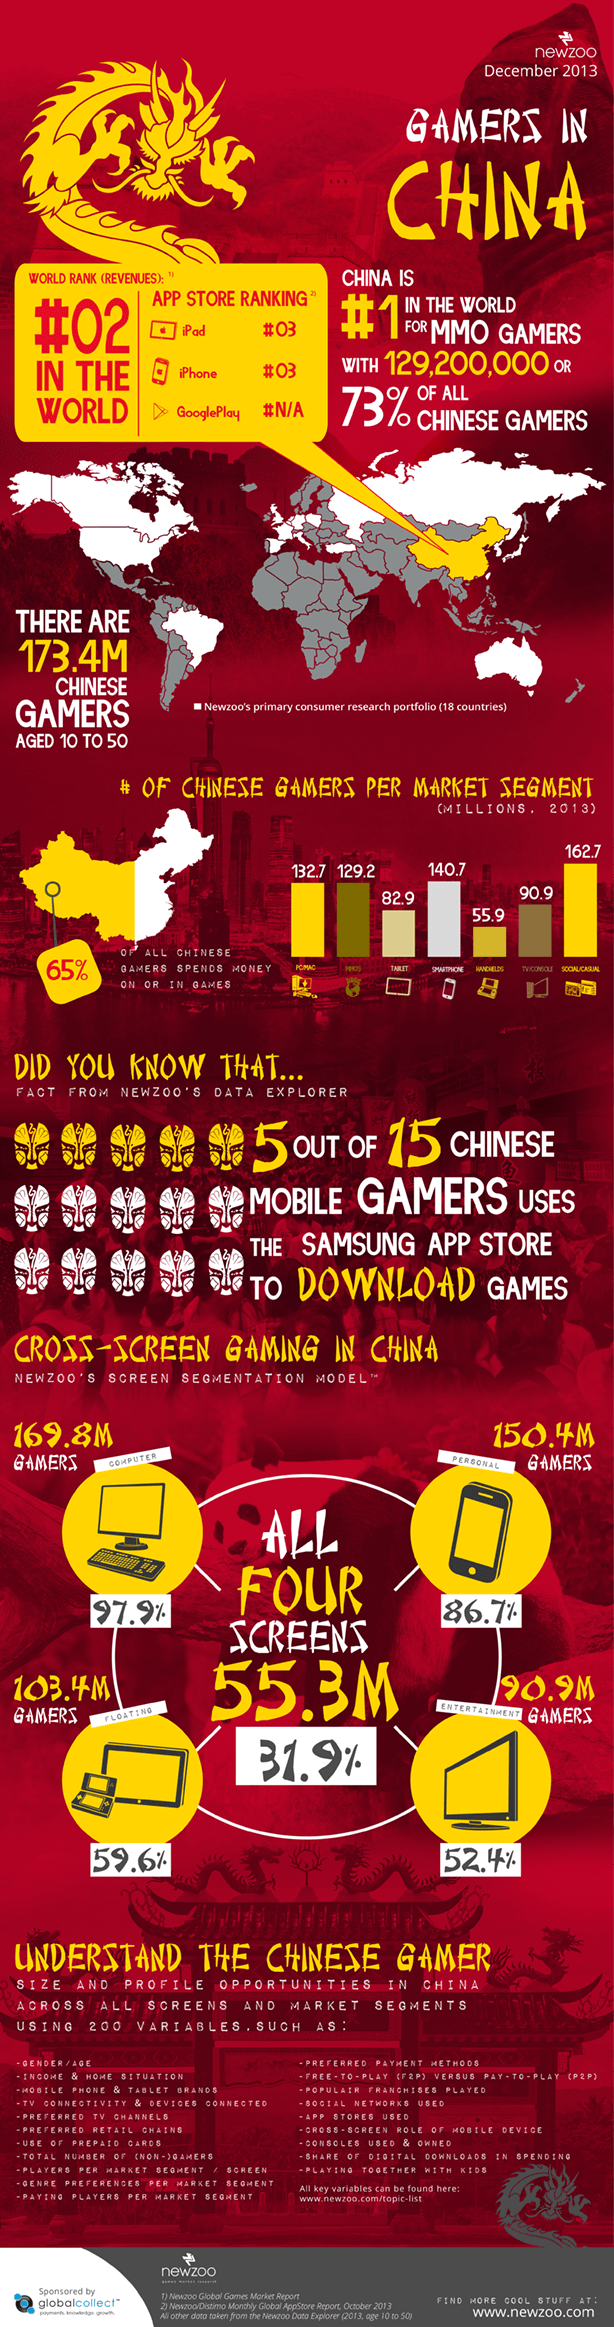 Infographic: The Chinese Community In Australia | IDENTITY Communications